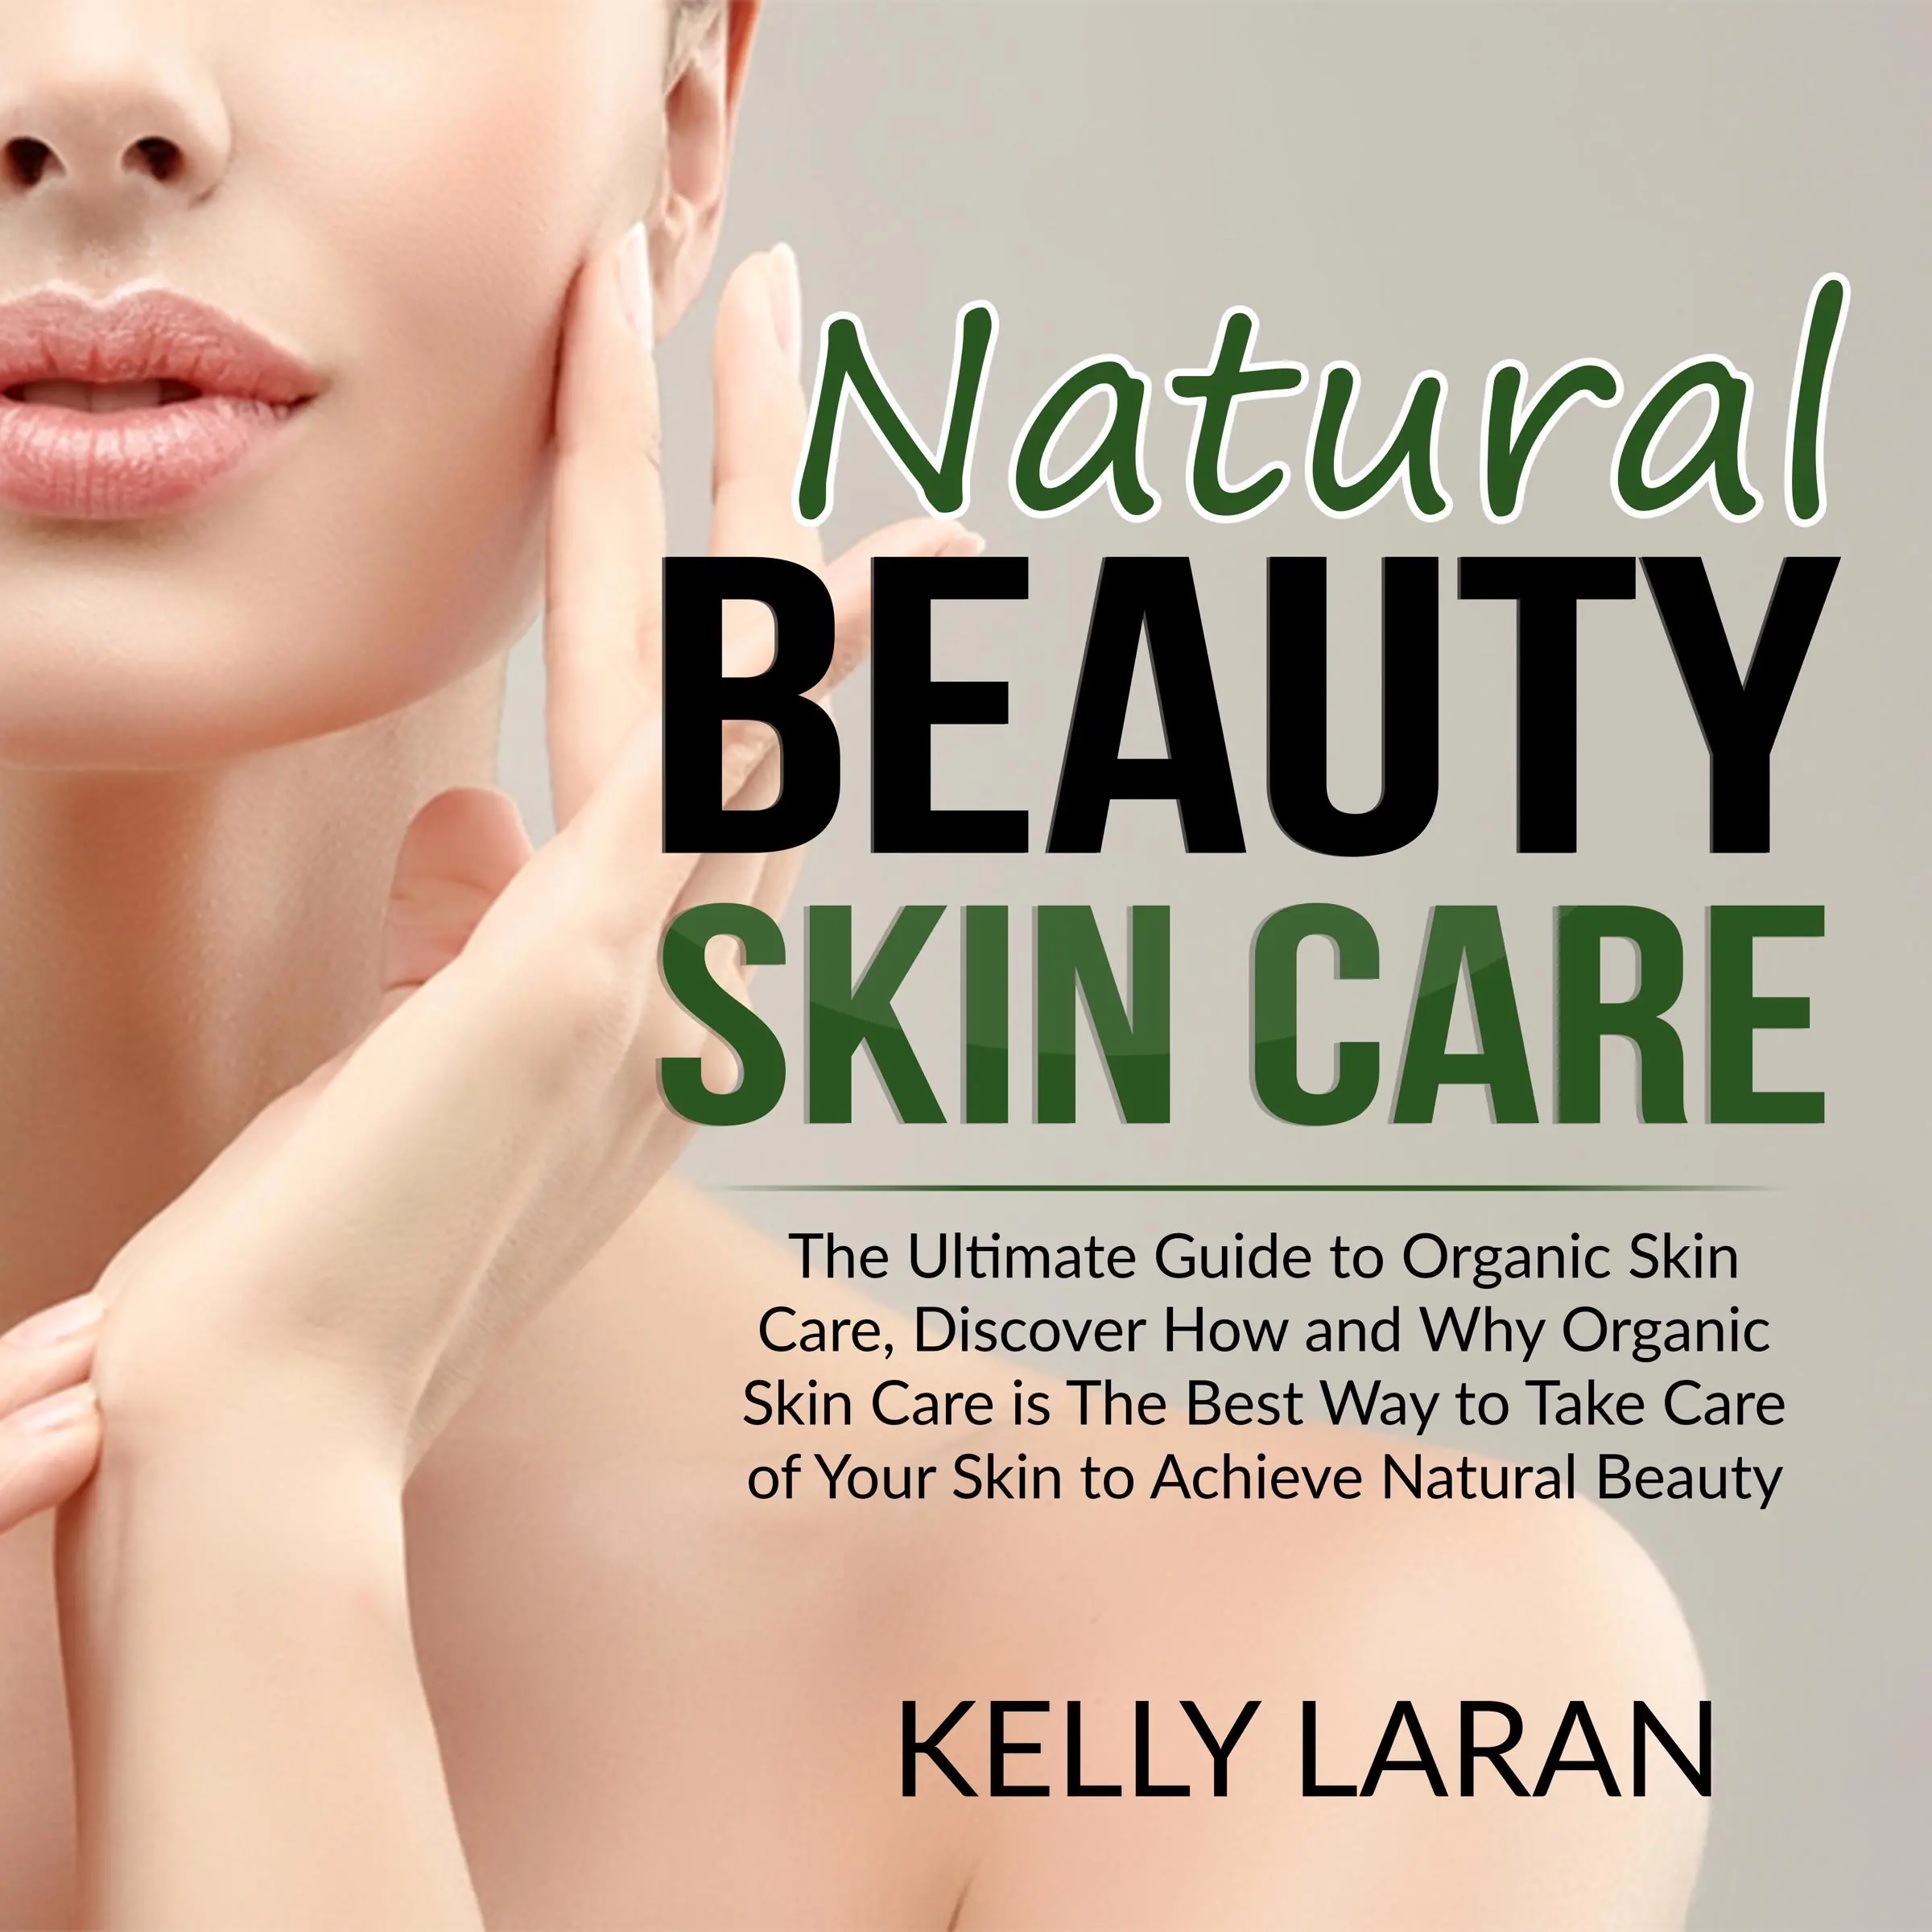 Natural Beauty Skin Care: The Ultimate Guide to Organic Skin Care, Discover How and Why Organic Skin Care is The Best Way to Take Care of Your Skin to Achieve Natural Beauty Audiobook by Kelly Laran